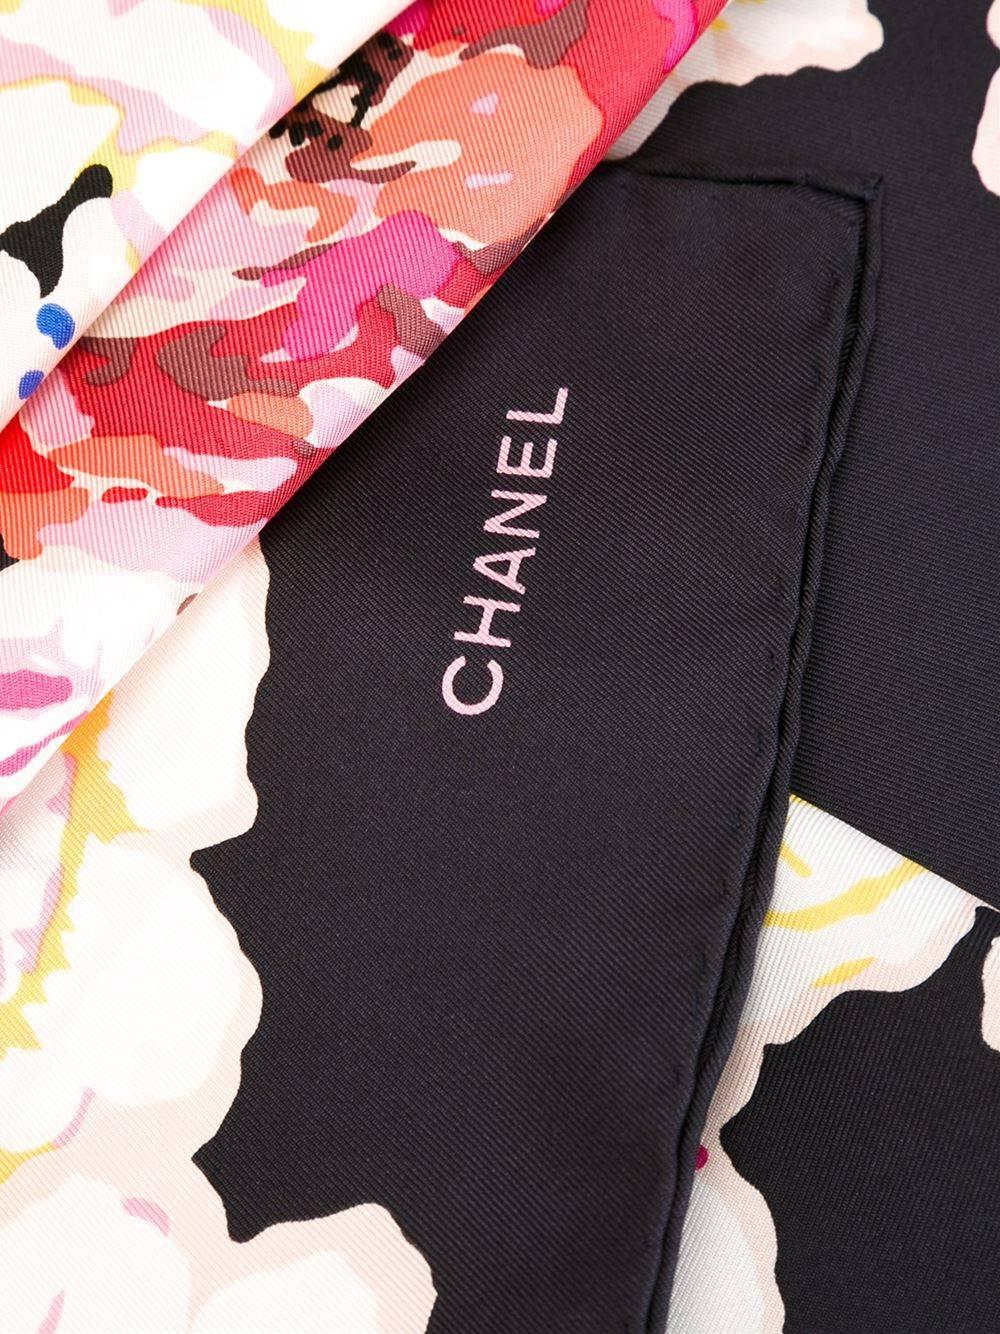 Multicoloured silk flower print scarf featuring a logo tag. 

Colour: Multi

Material: Silk 100%

Measurements: W: 86cm, L: 88cm

Condition: 10 out of 10
Excellent